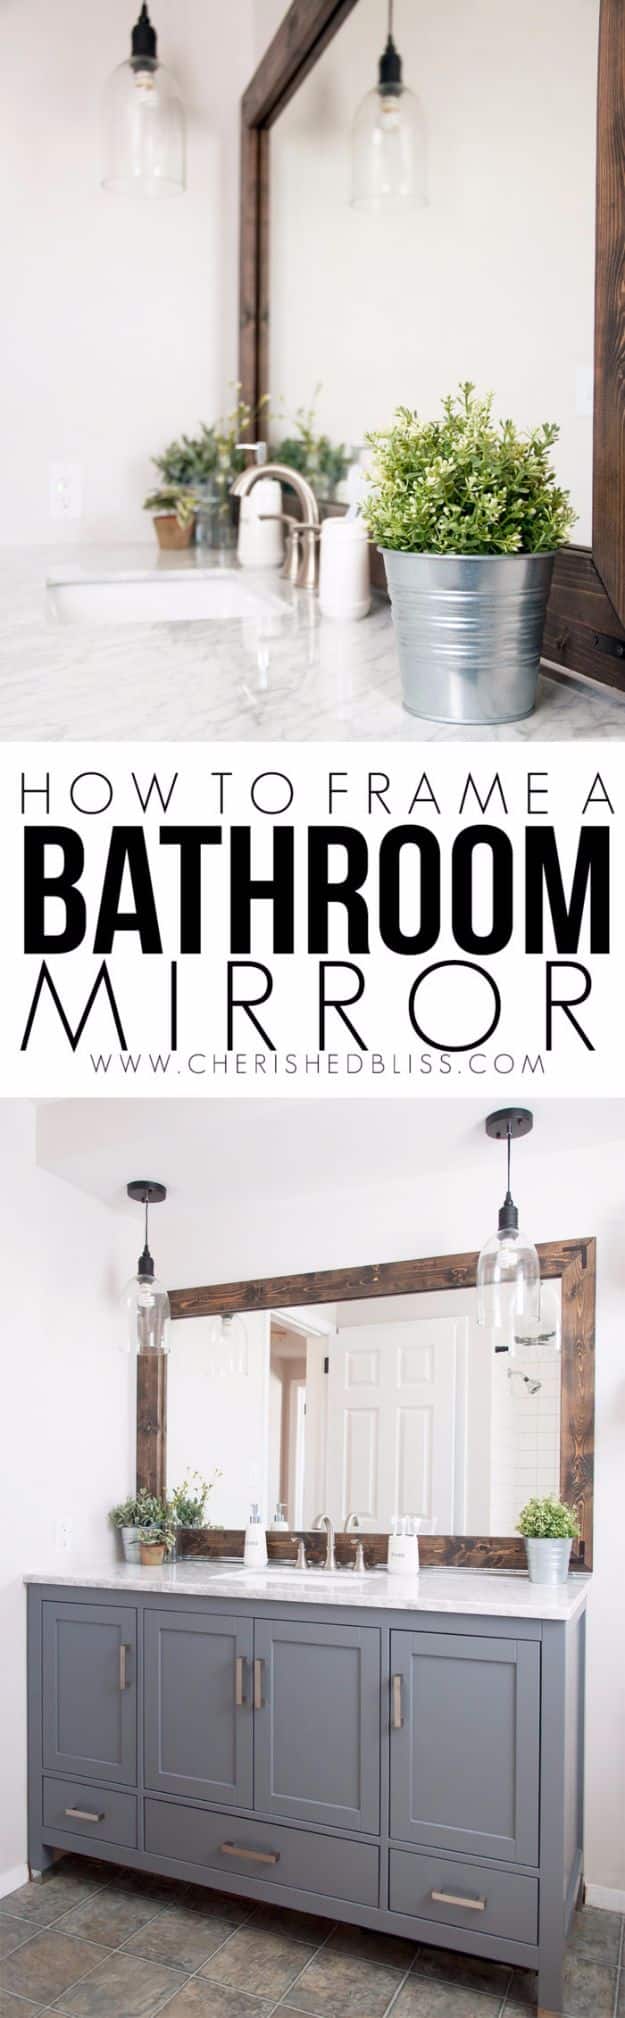 DIY Remodeling Hacks - Frame a Bathroom Mirror - Quick and Easy Home Repair Tips and Tricks - Cool Hacks for DIY Home Improvement Ideas - Cheap Ways To Fix Bathroom, Bedroom, Kitchen, Outdoor, Living Room and Lighting - Creative Renovation on A Budget - DIY Projects and Crafts by DIY JOY #remodeling #homeimprovement #diy #hacks